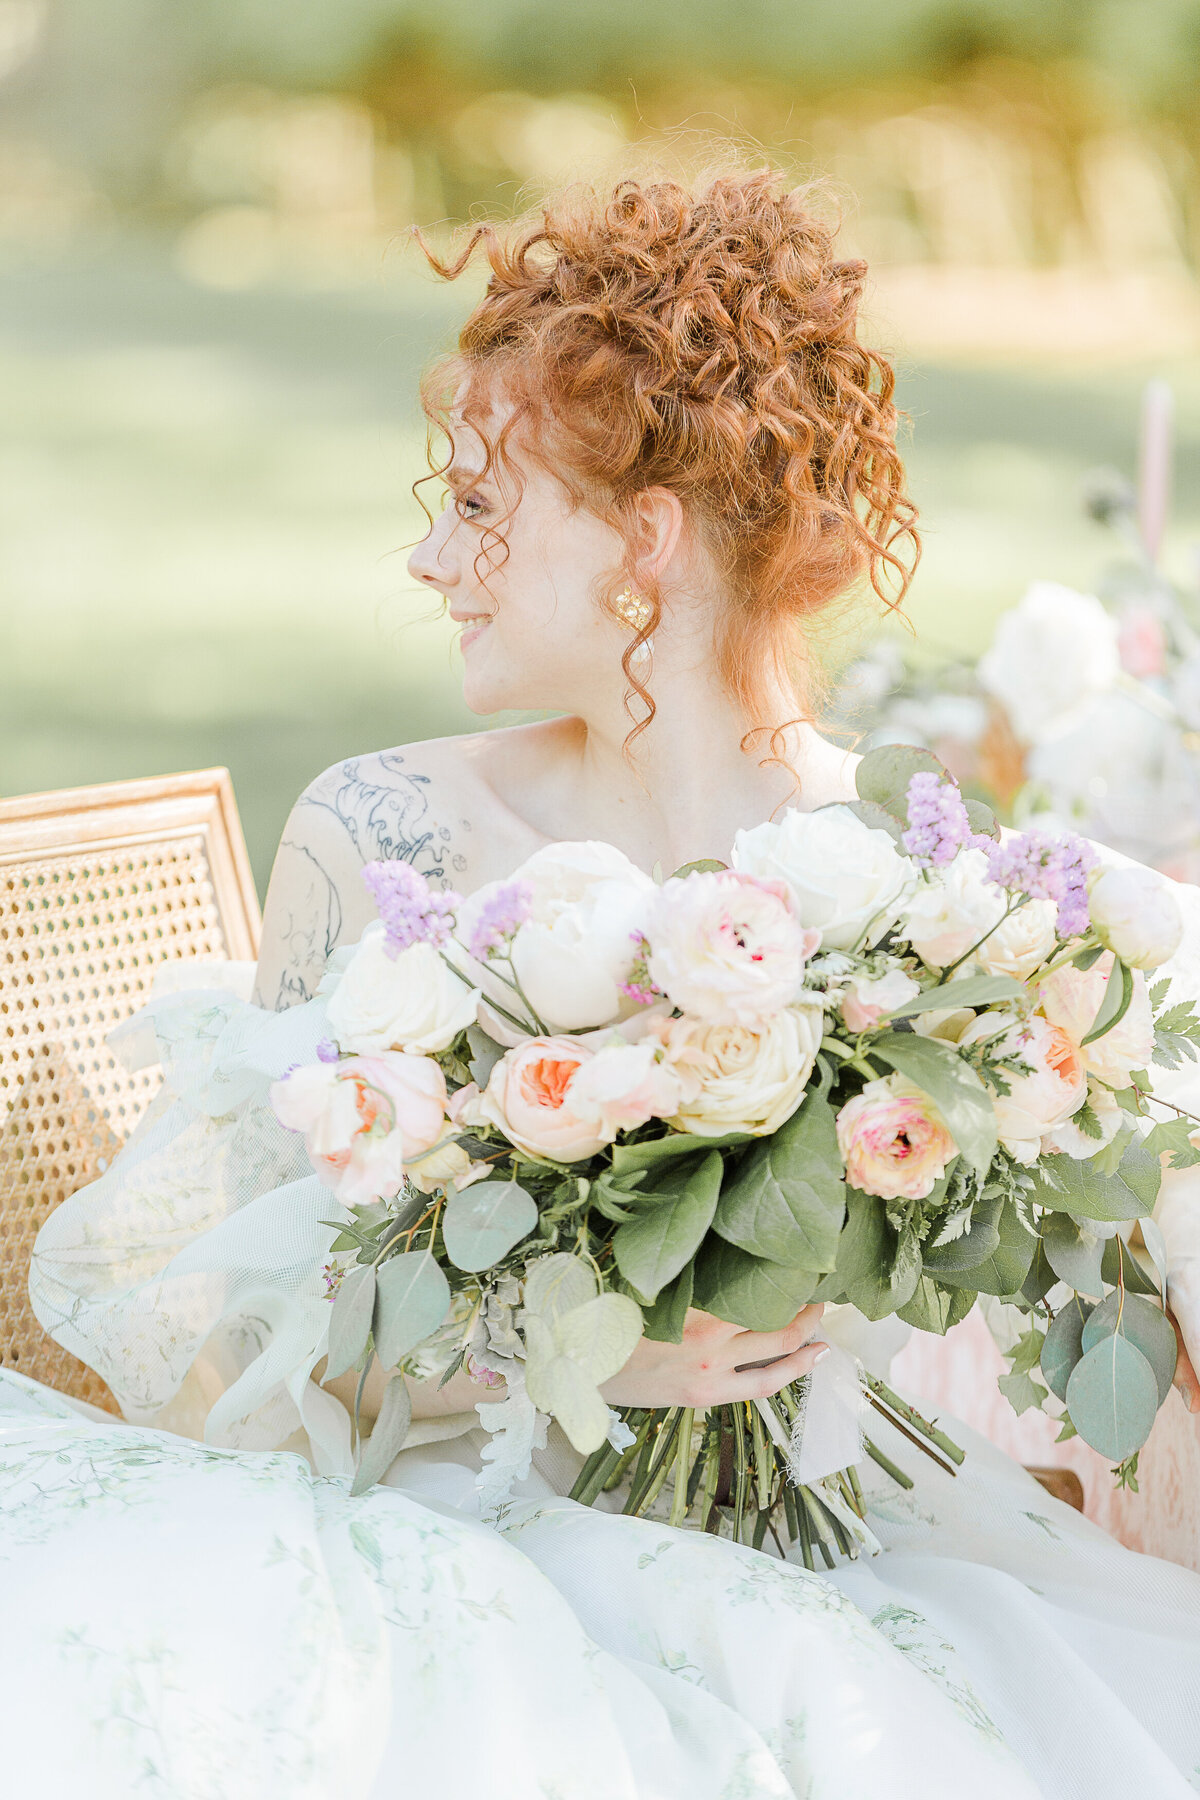 Bride is captured at a Parisean styled shoot holding a large bouquet. Her red hair upswept and looking over her shoulder. Captured by Lia Rose Weddings, Destination Wedding Photographer.